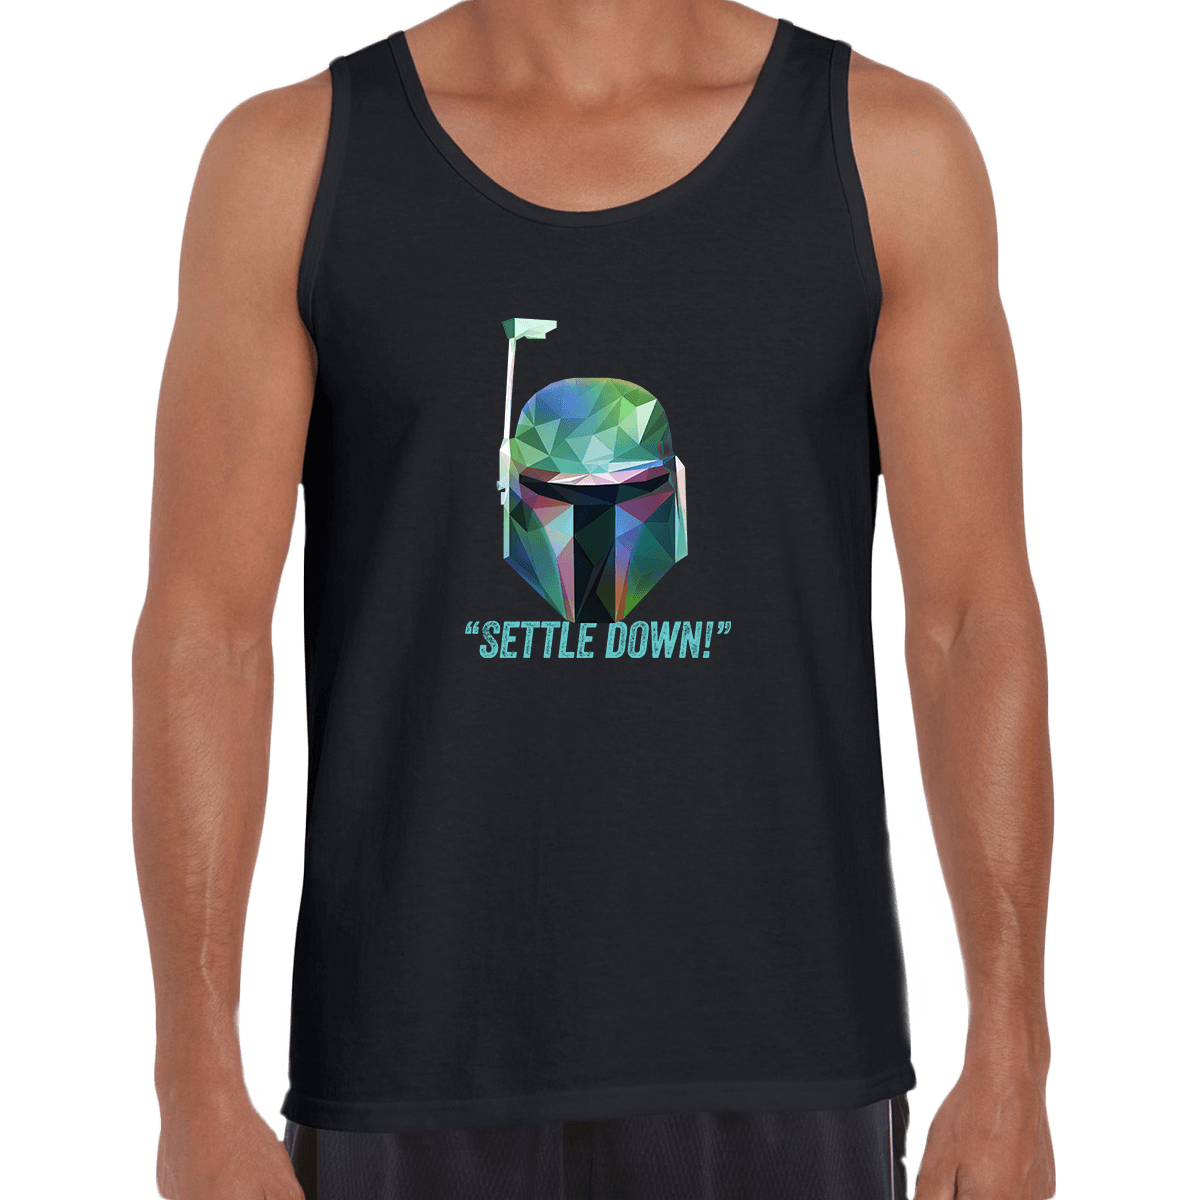 Boba Fett Settle Down Famous Star Wars character quote Unisex Movie Tank Top - Kuzi Tees